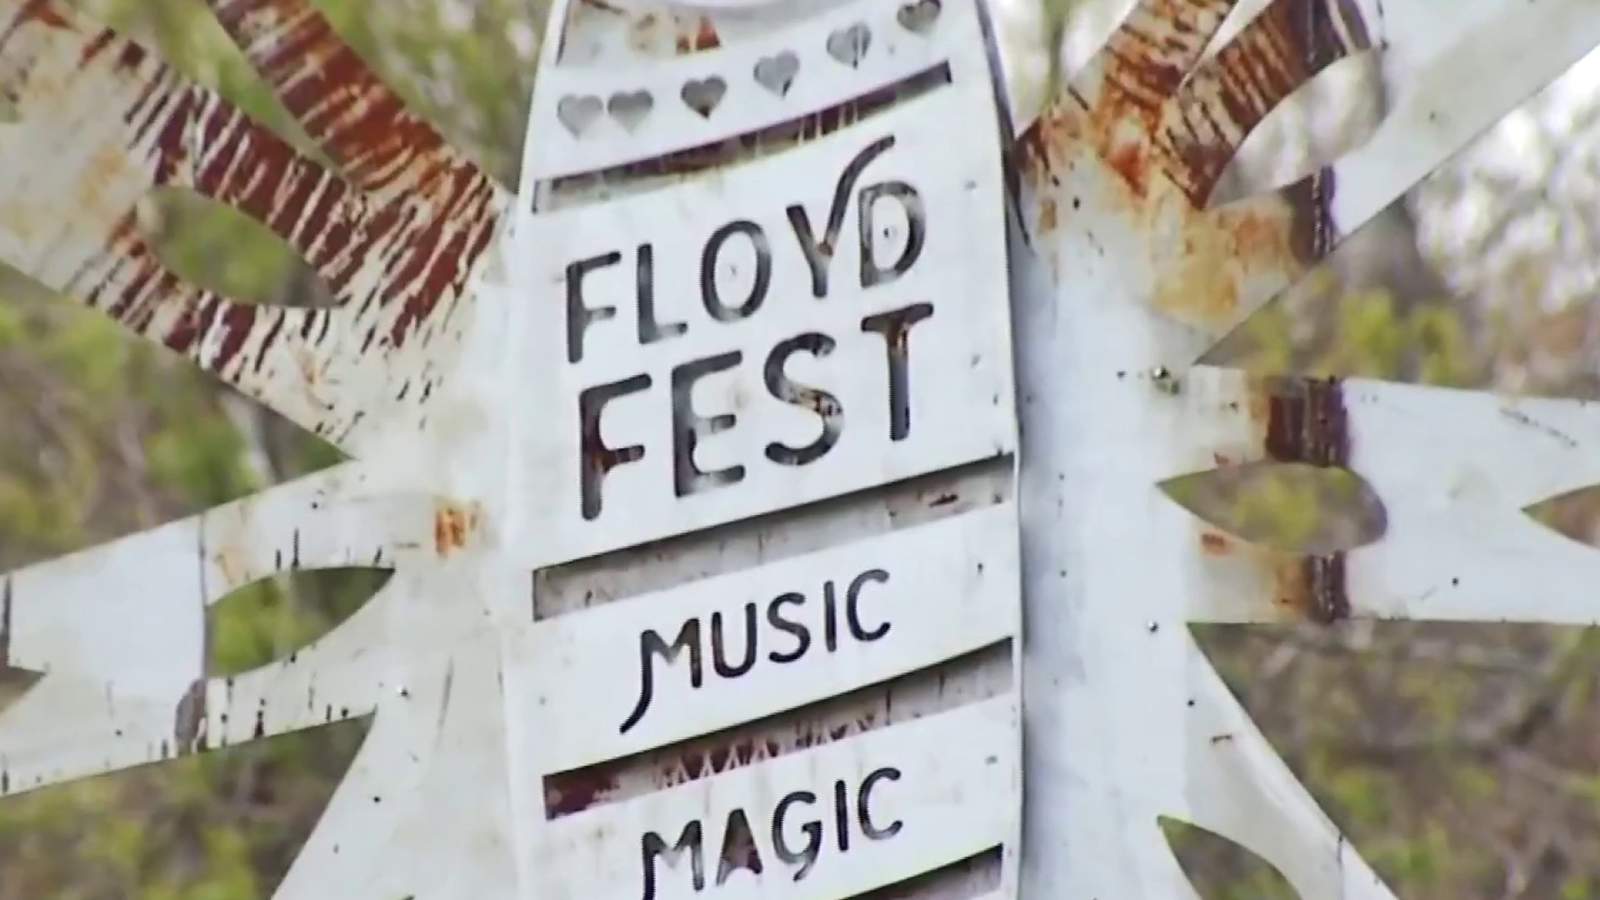 FloydFest organizers encouraged by eased outdoor entertainment restrictions